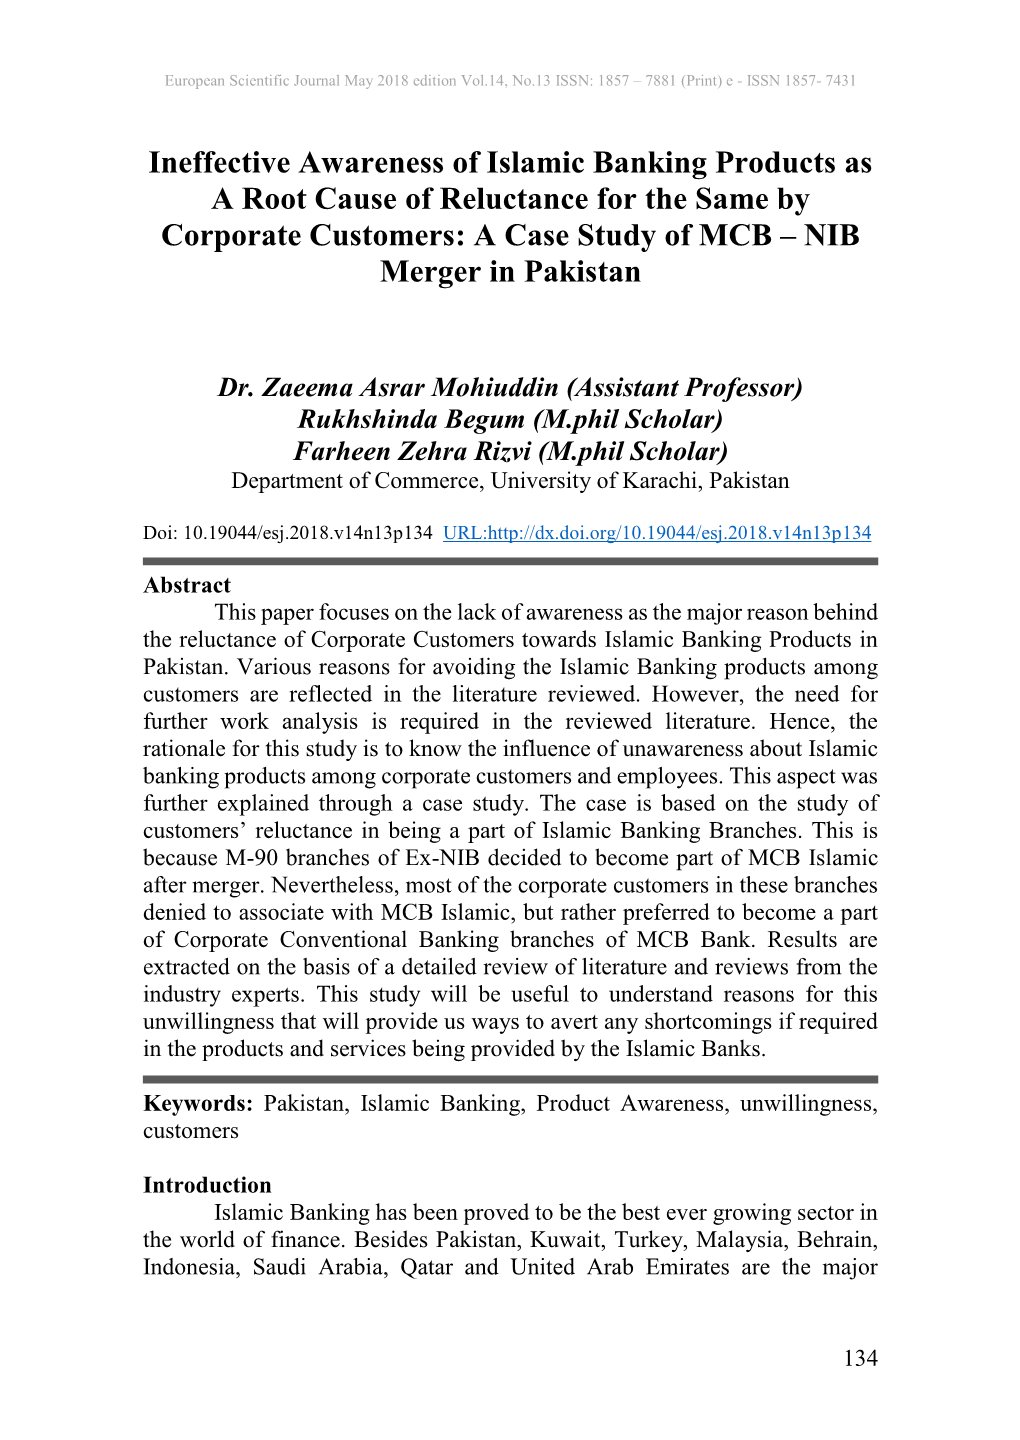 Ineffective Awareness of Islamic Banking Products As a Root Cause of Reluctance for the Same by Corporate Customers: a Case Study of MCB – NIB Merger in Pakistan